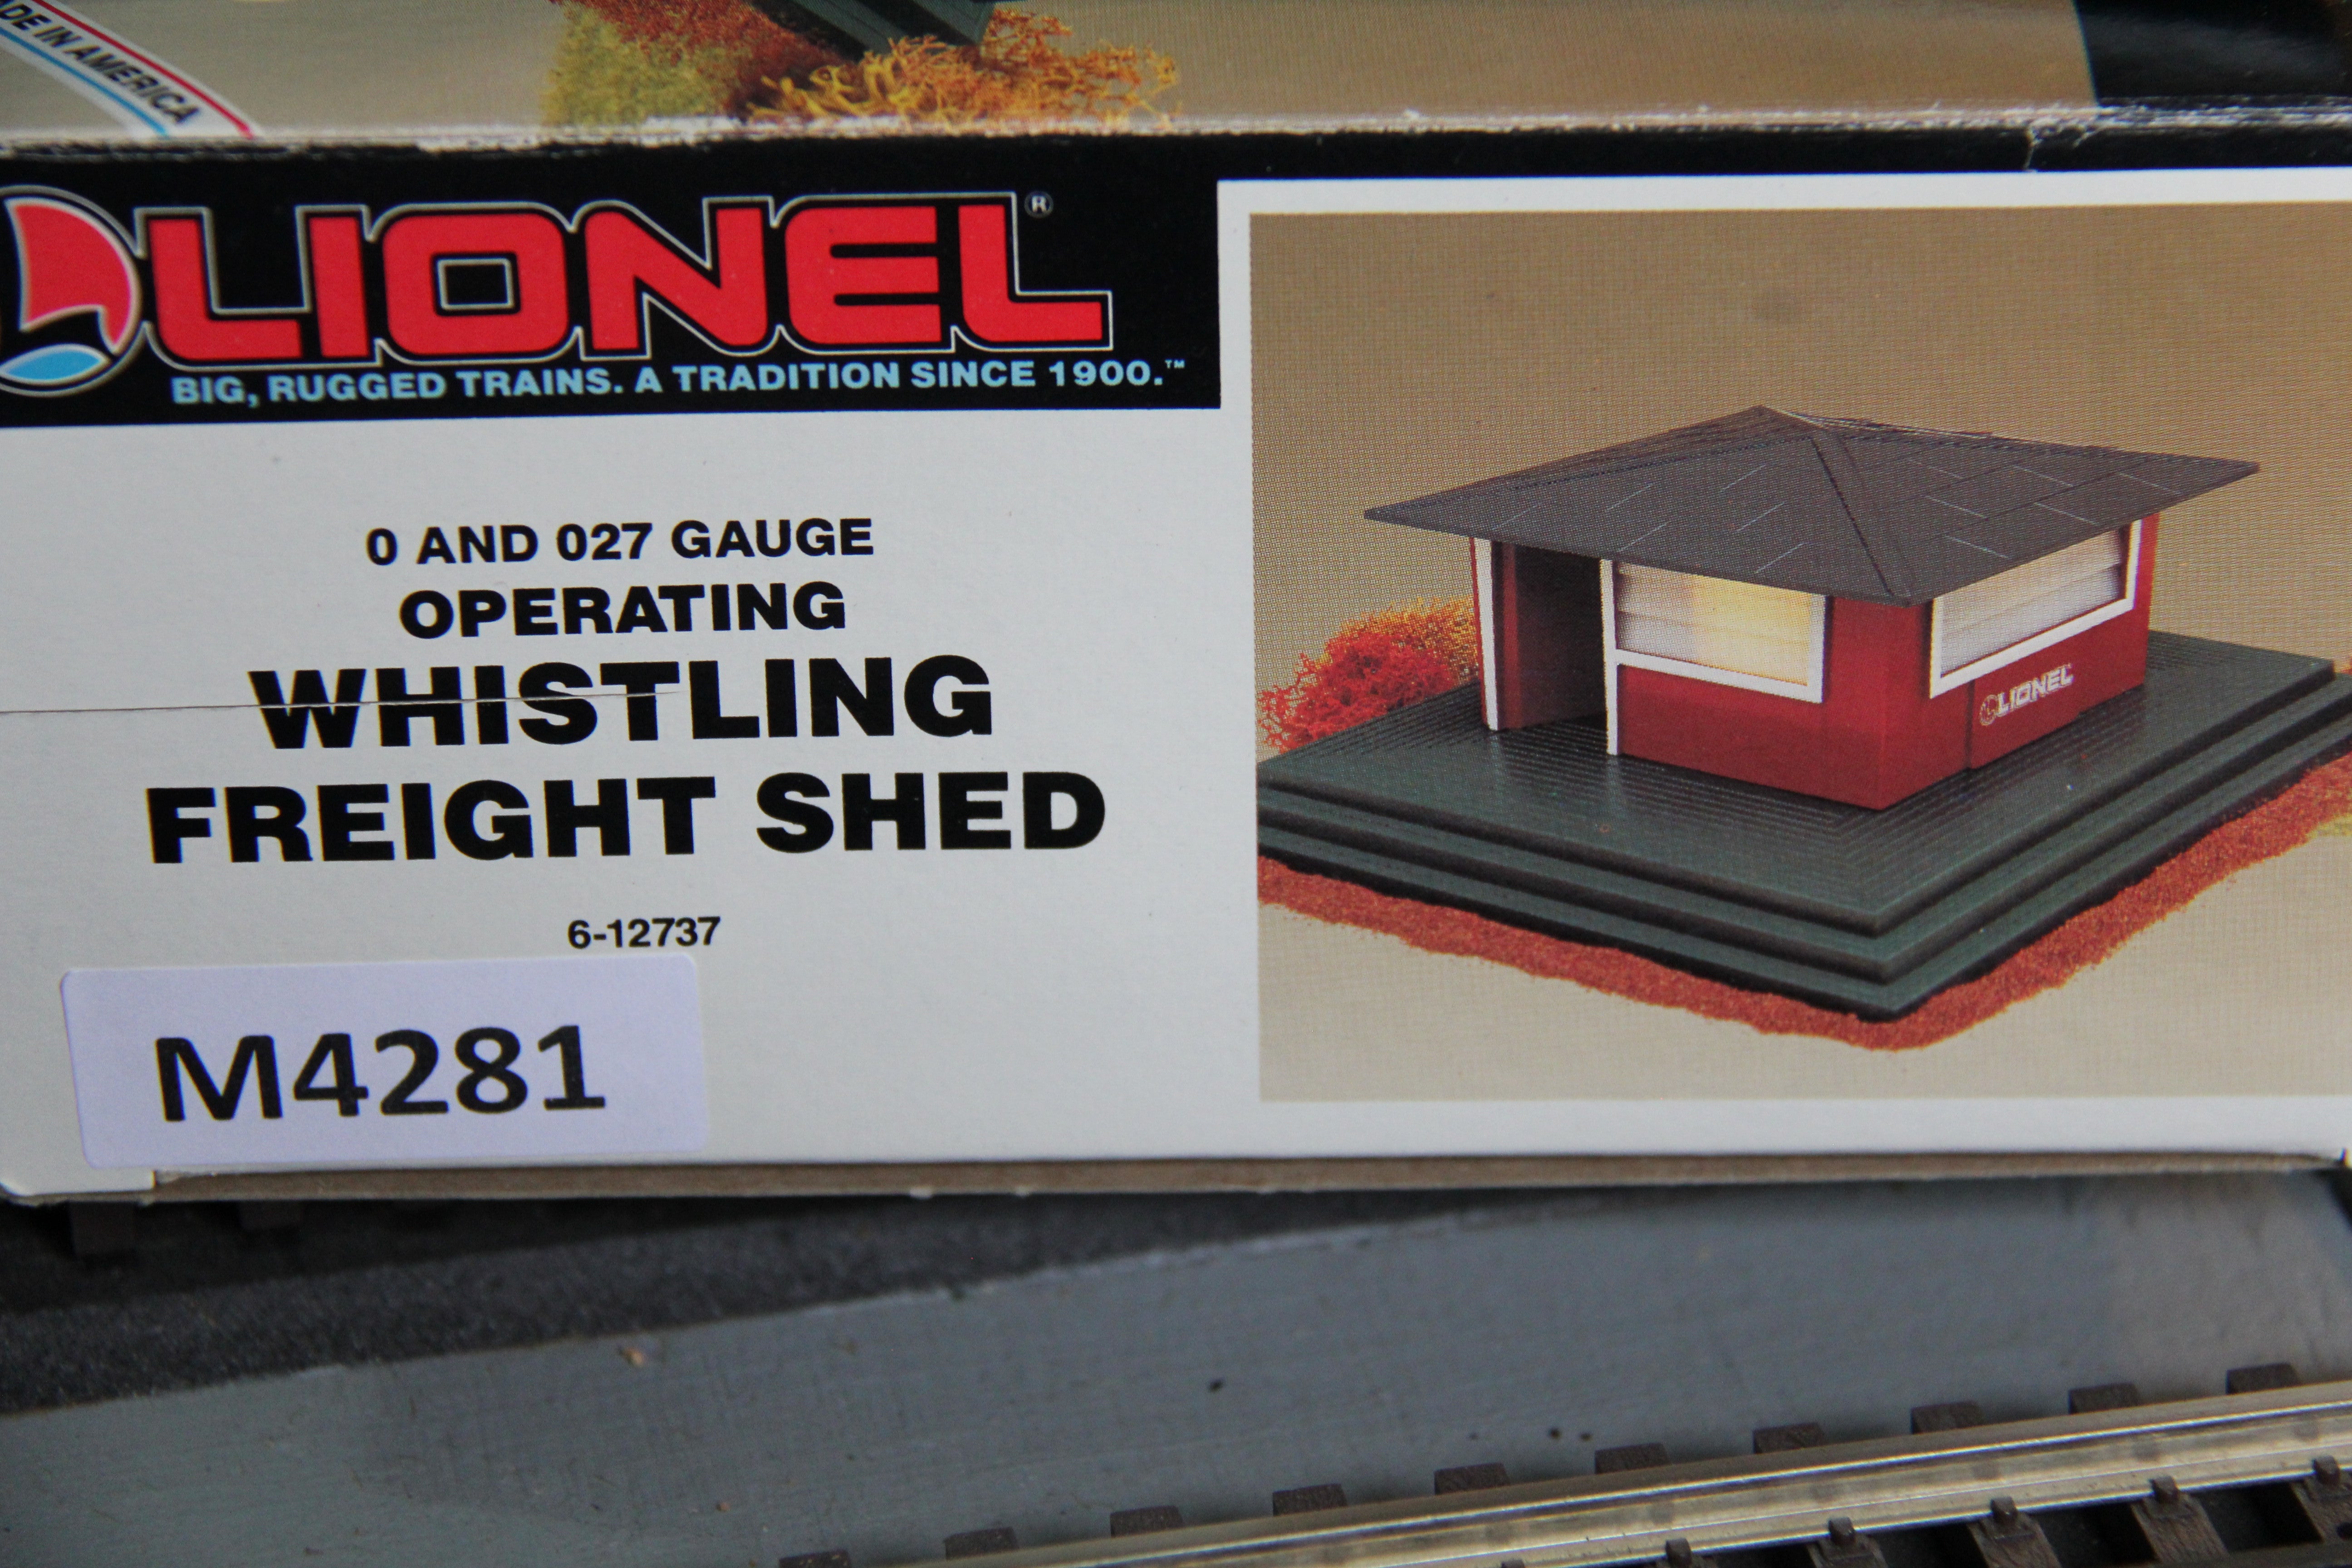 Lionel 6-12737 Operating Whistling Freight Shed-Second hand-M4281